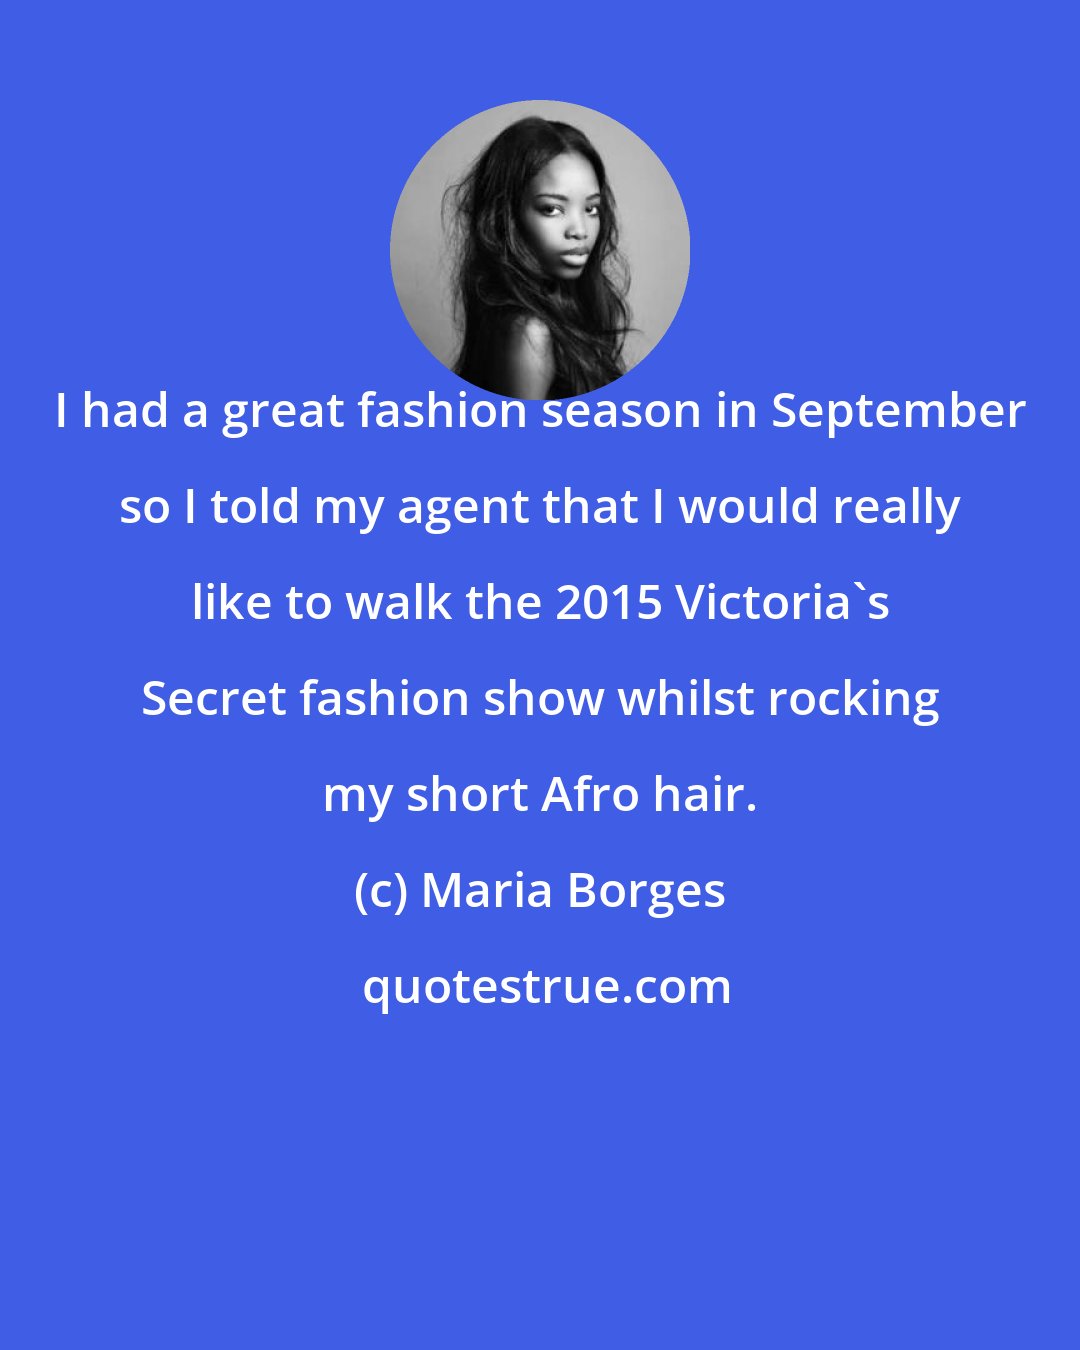 Maria Borges: I had a great fashion season in September so I told my agent that I would really like to walk the 2015 Victoria's Secret fashion show whilst rocking my short Afro hair.